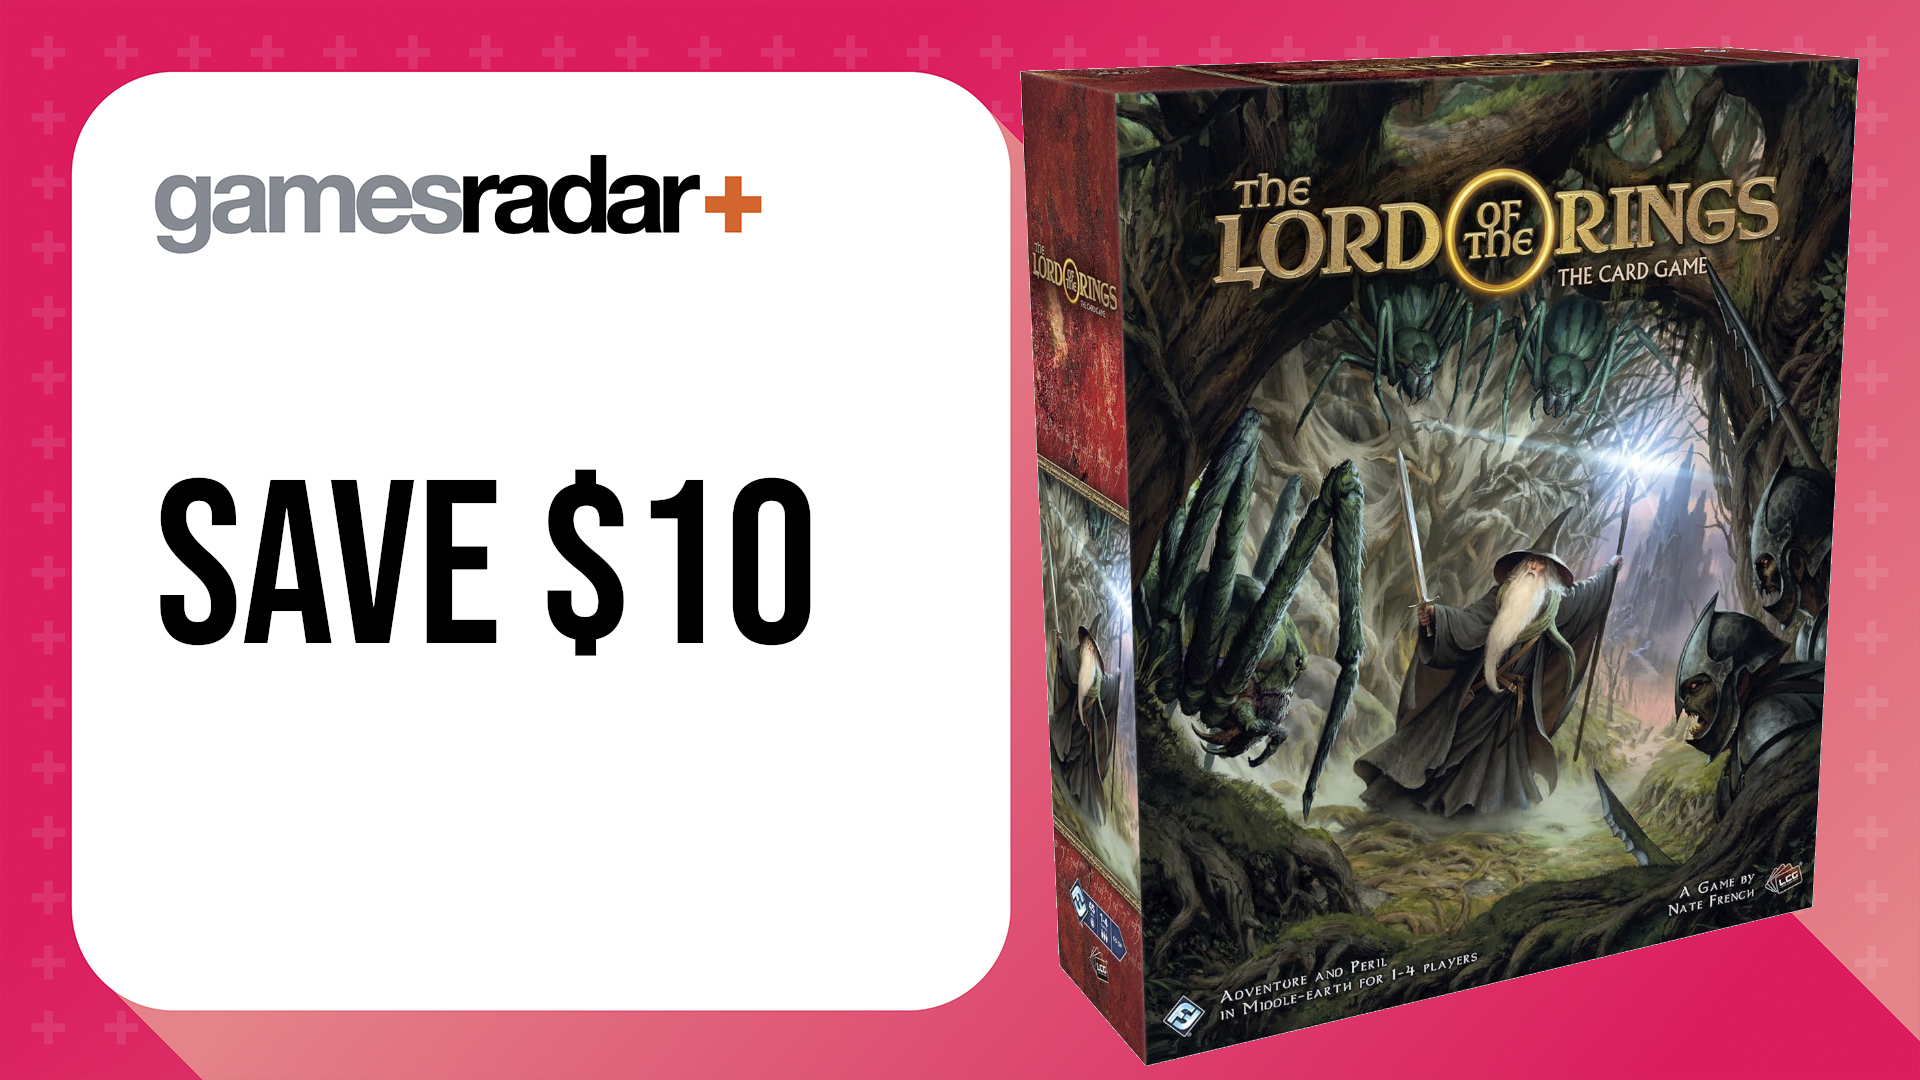 Amazon Prime Day board game sales with Lord of the Rings The Card Game Revised Core Edition box